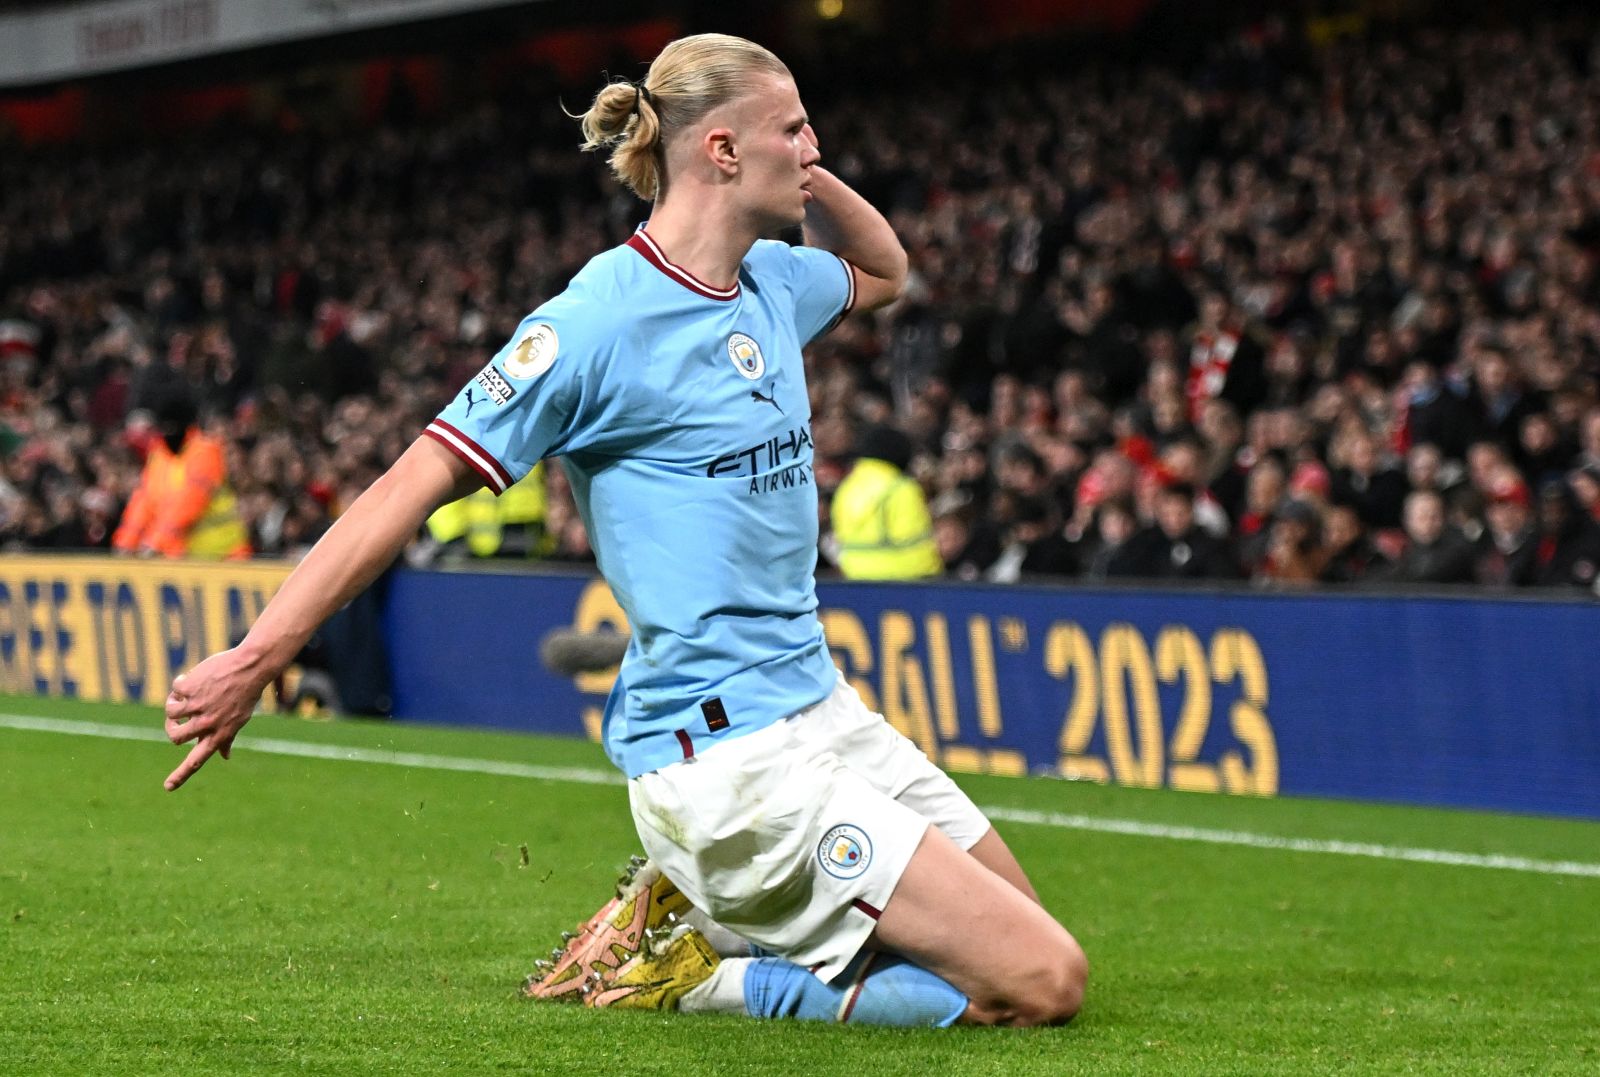 epa10469260 Erling Haaland of Manchester City celebrates after scoring his team's third goal during the English Premier League soccer match between Arsenal London and Manchester City in London, Britain, 15 February 2023.  EPA/Daniel Hambury EDITORIAL USE ONLY. No use with unauthorized audio, video, data, fixture lists, club/league logos or 'live' services. Online in-match use limited to 120 images, no video emulation. No use in betting, games or single club/league/player publications